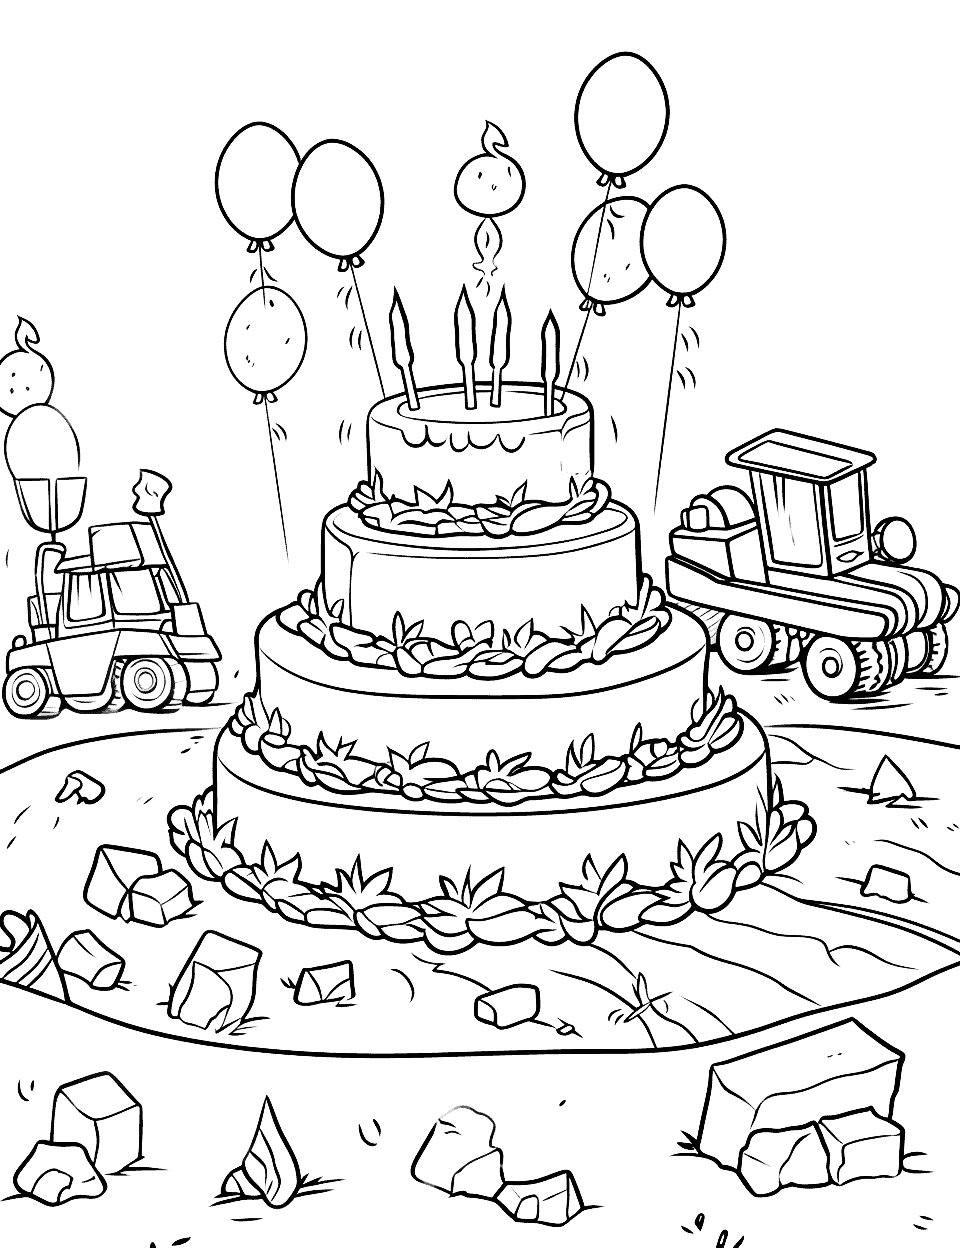 Construction Site Birthday Happy Coloring Page - Construction vehicles gathered around a mound of dirt shaped like a birthday cake.